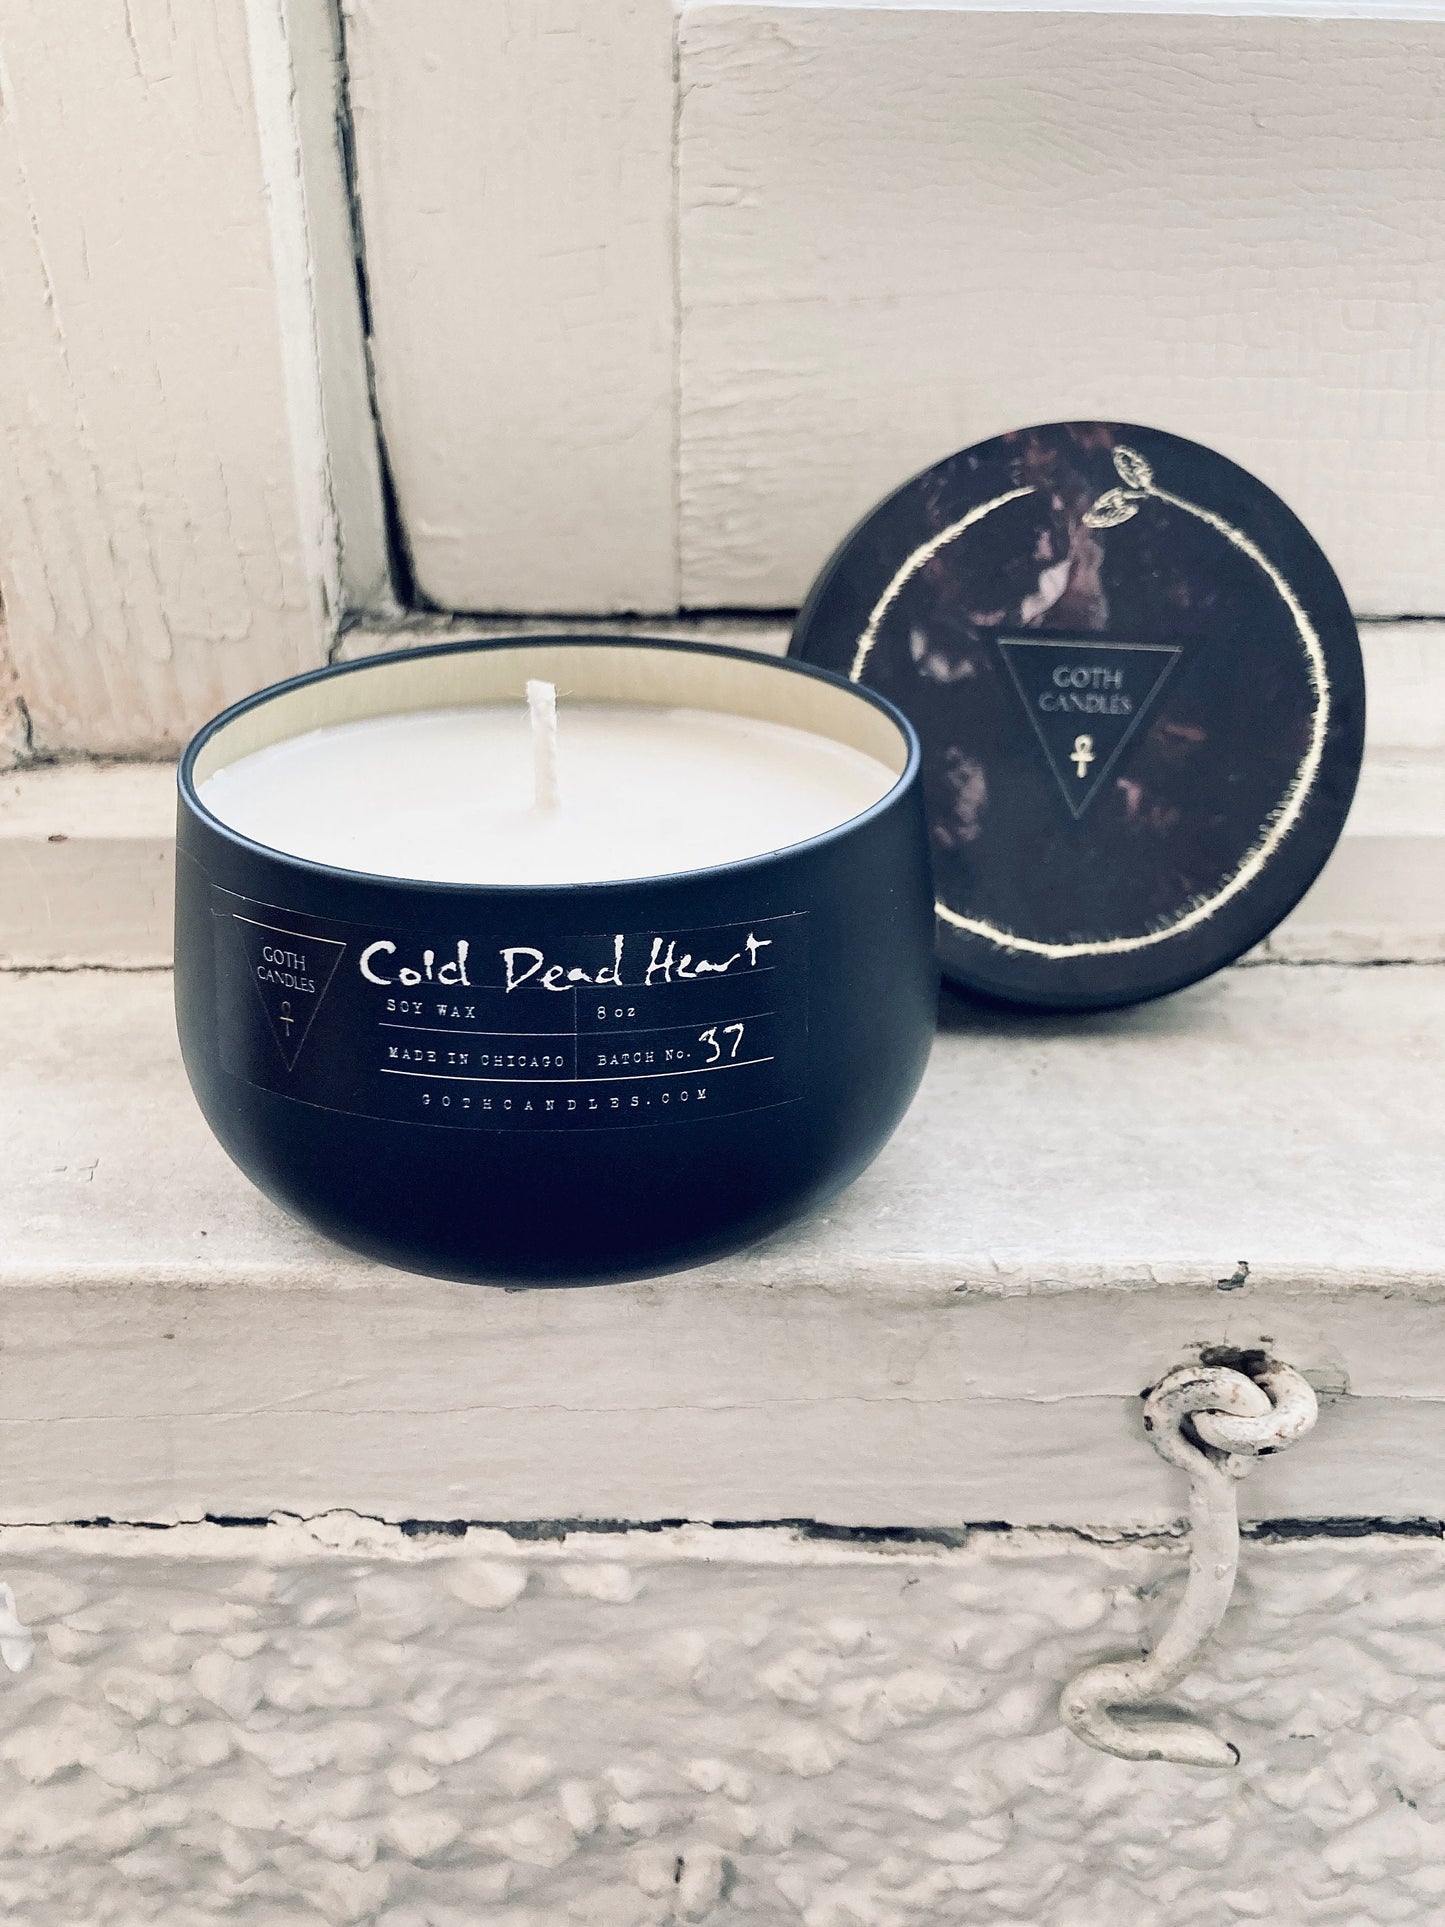 COLD DEAD HEART | Goth Candles | Winter Pine and Lavender Scent | Premium Soy Wax 8 oz Tin Vessel|